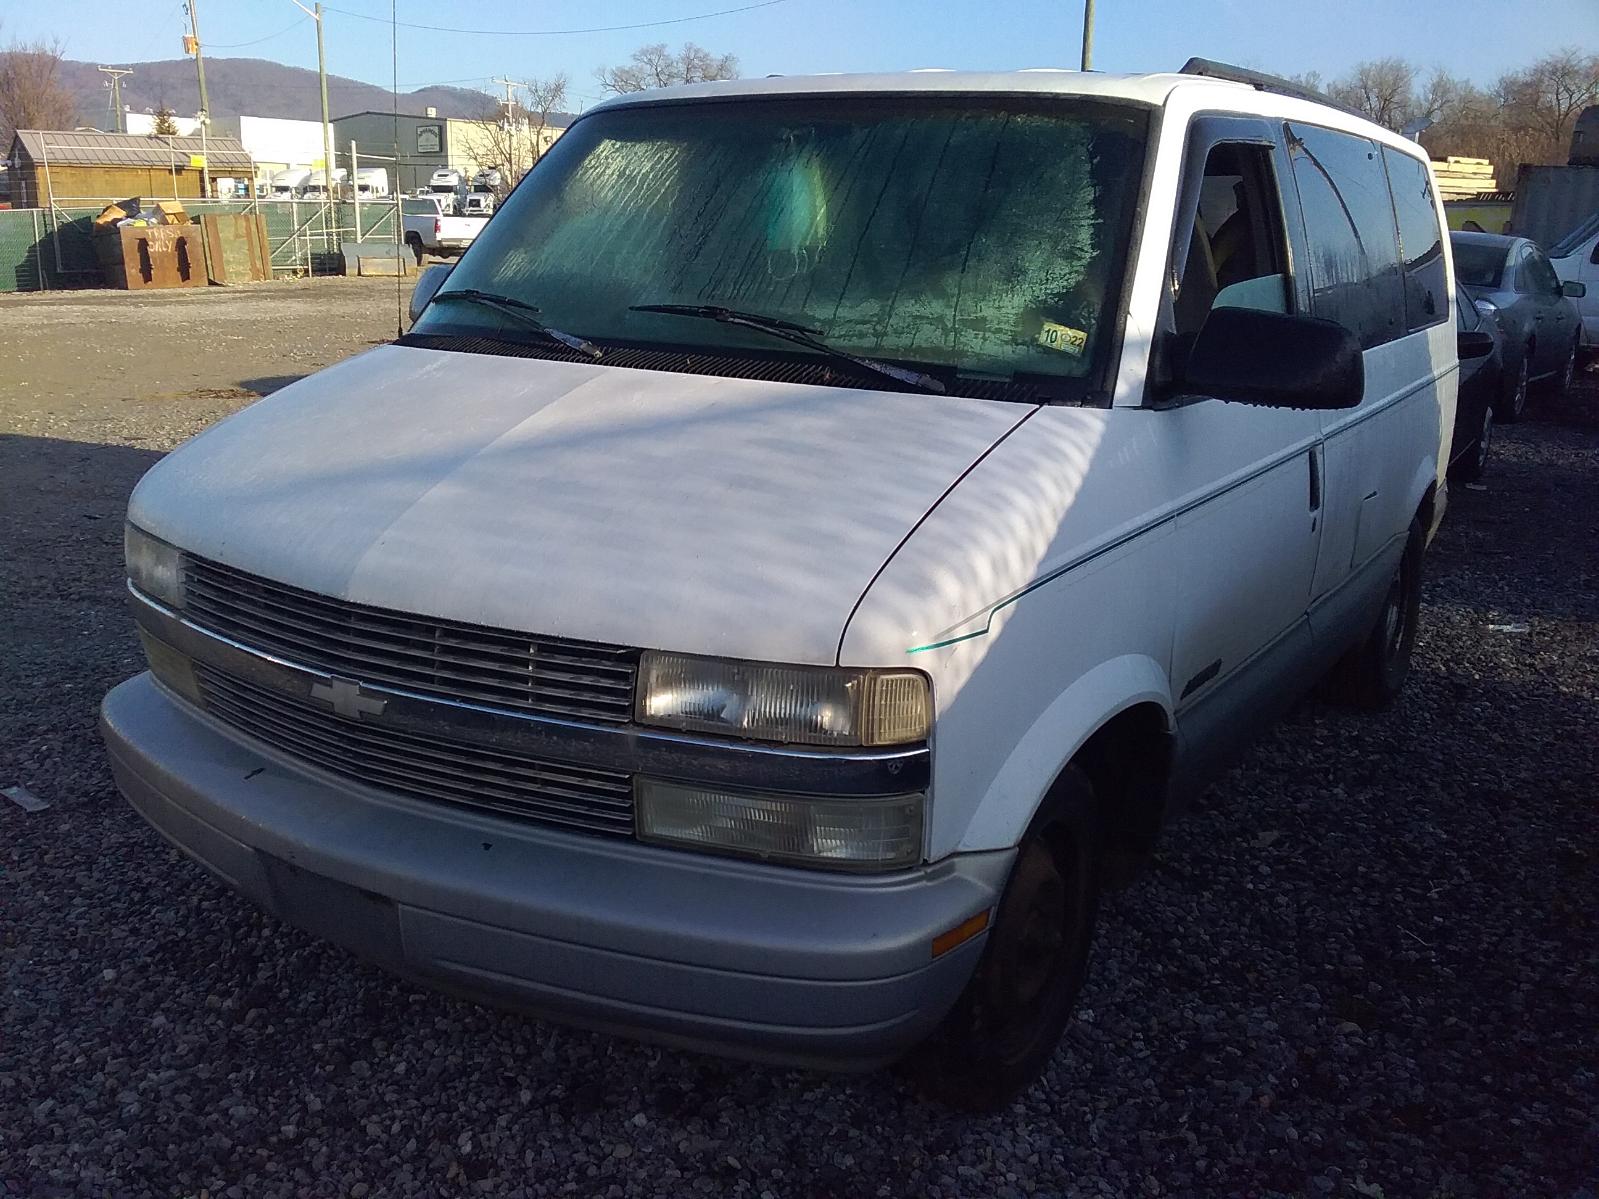 Used 1998 CHEVROLET ASTRO DETAILS - Pick N Save